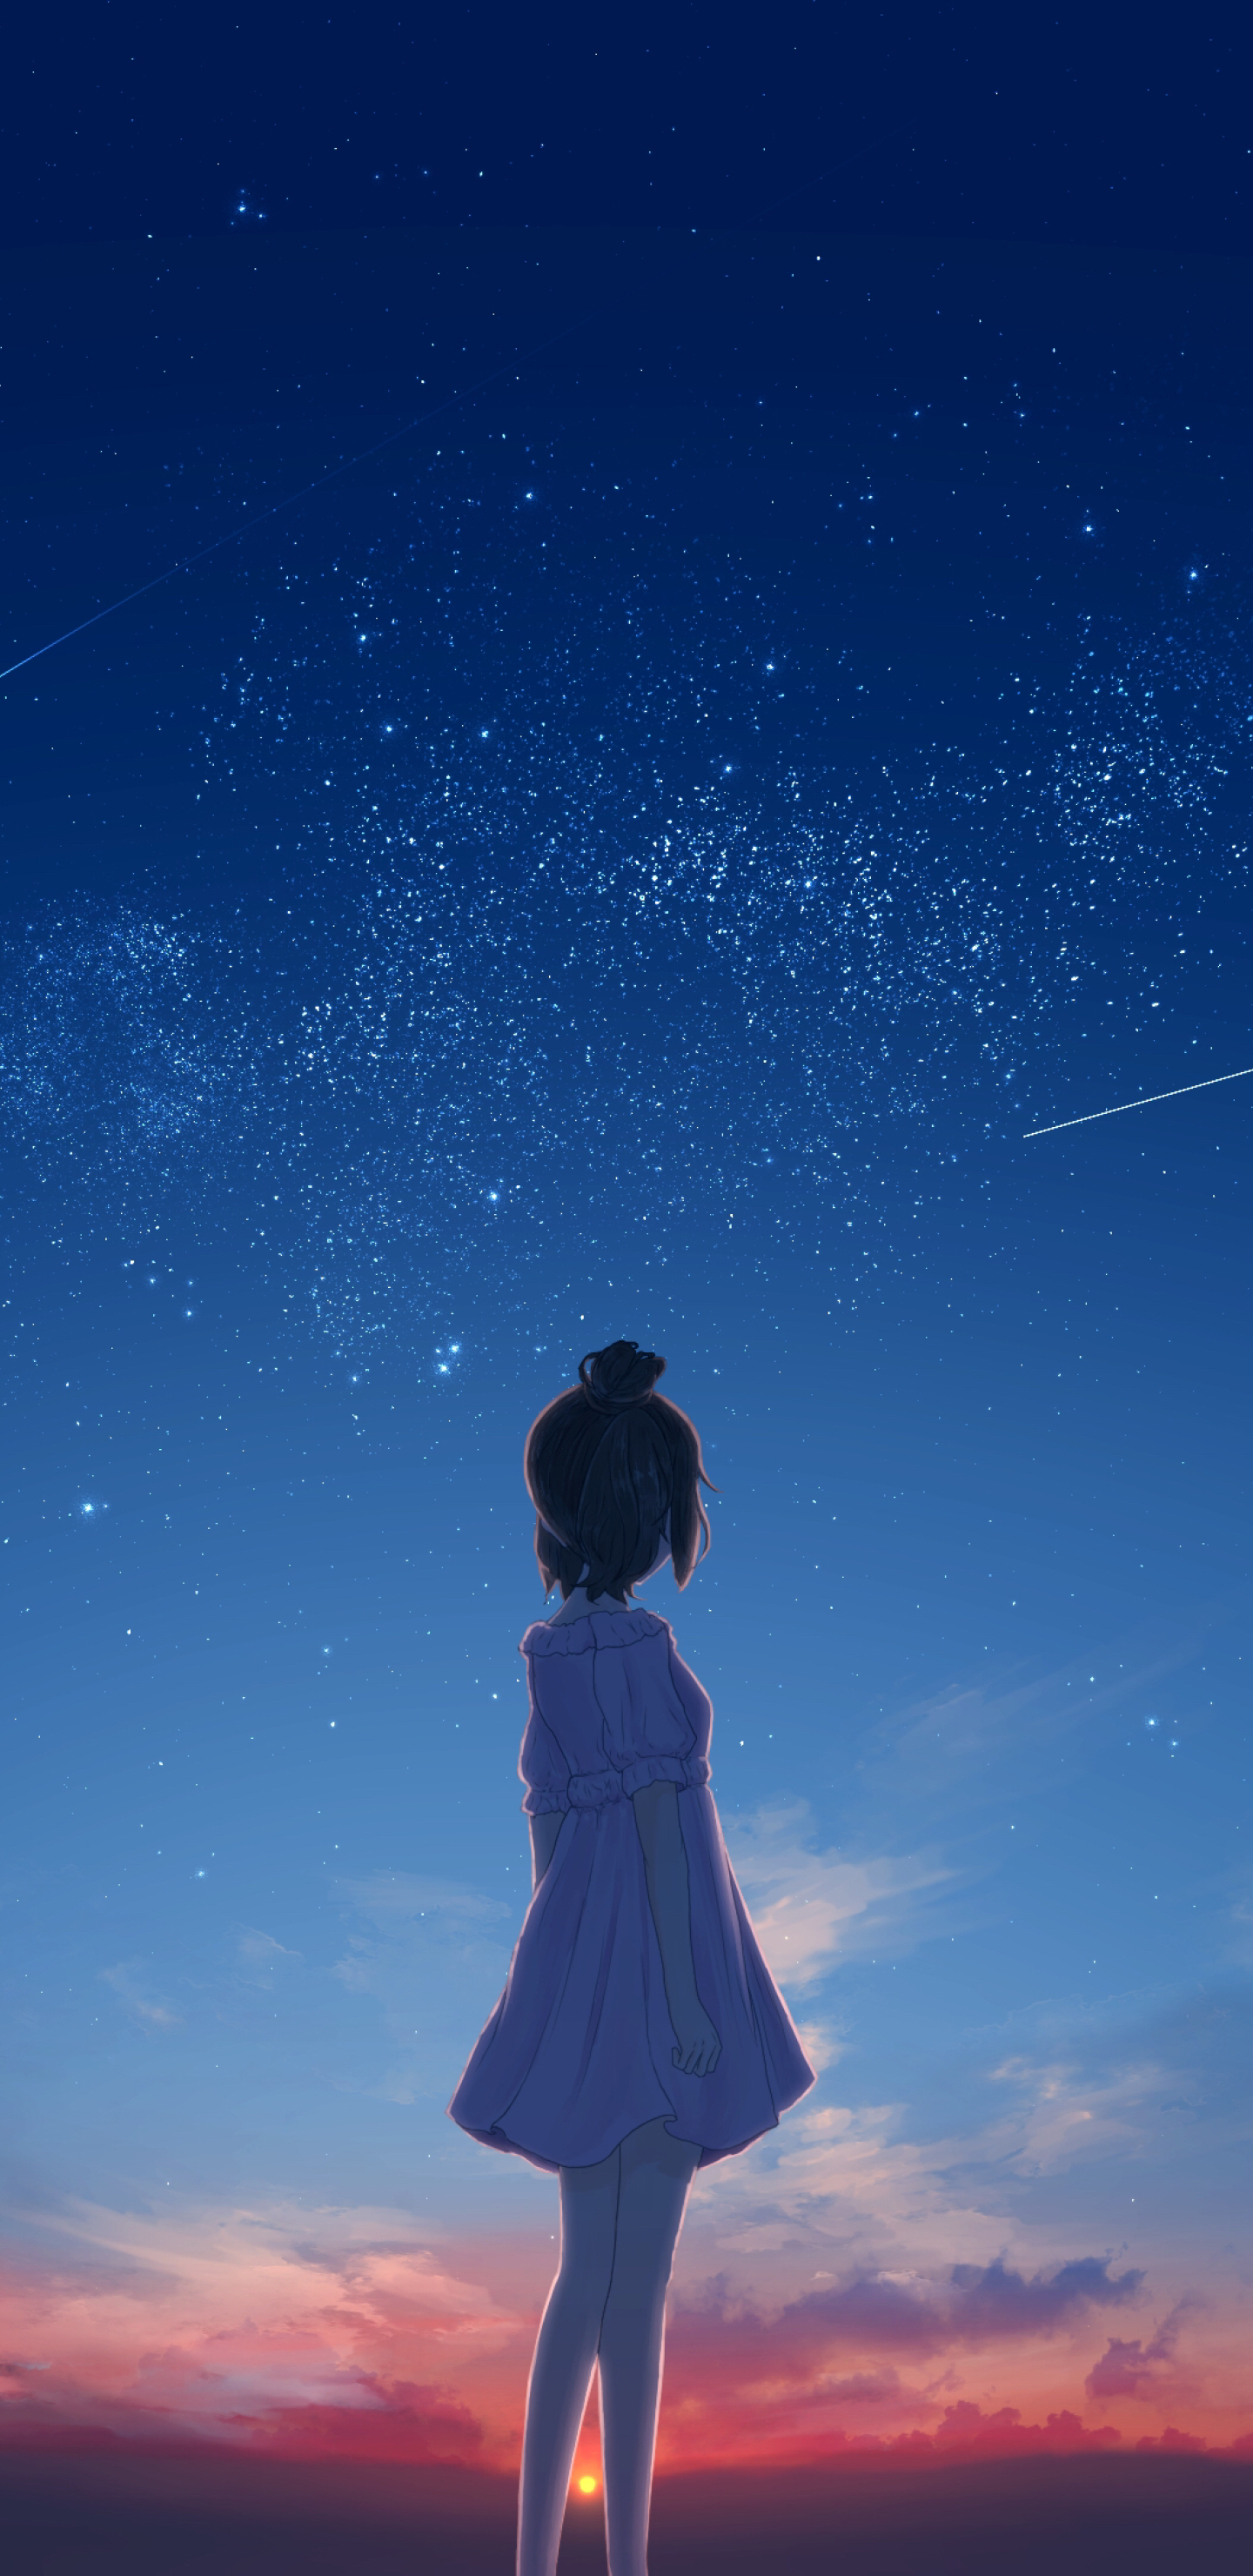 1920x1080 Anime Girl Alone At Bridge Watching The Galaxy Full Of Stars 4k  Laptop Full HD 1080P HD 4k Wallpapers Images Backgrounds Photos and  Pictures